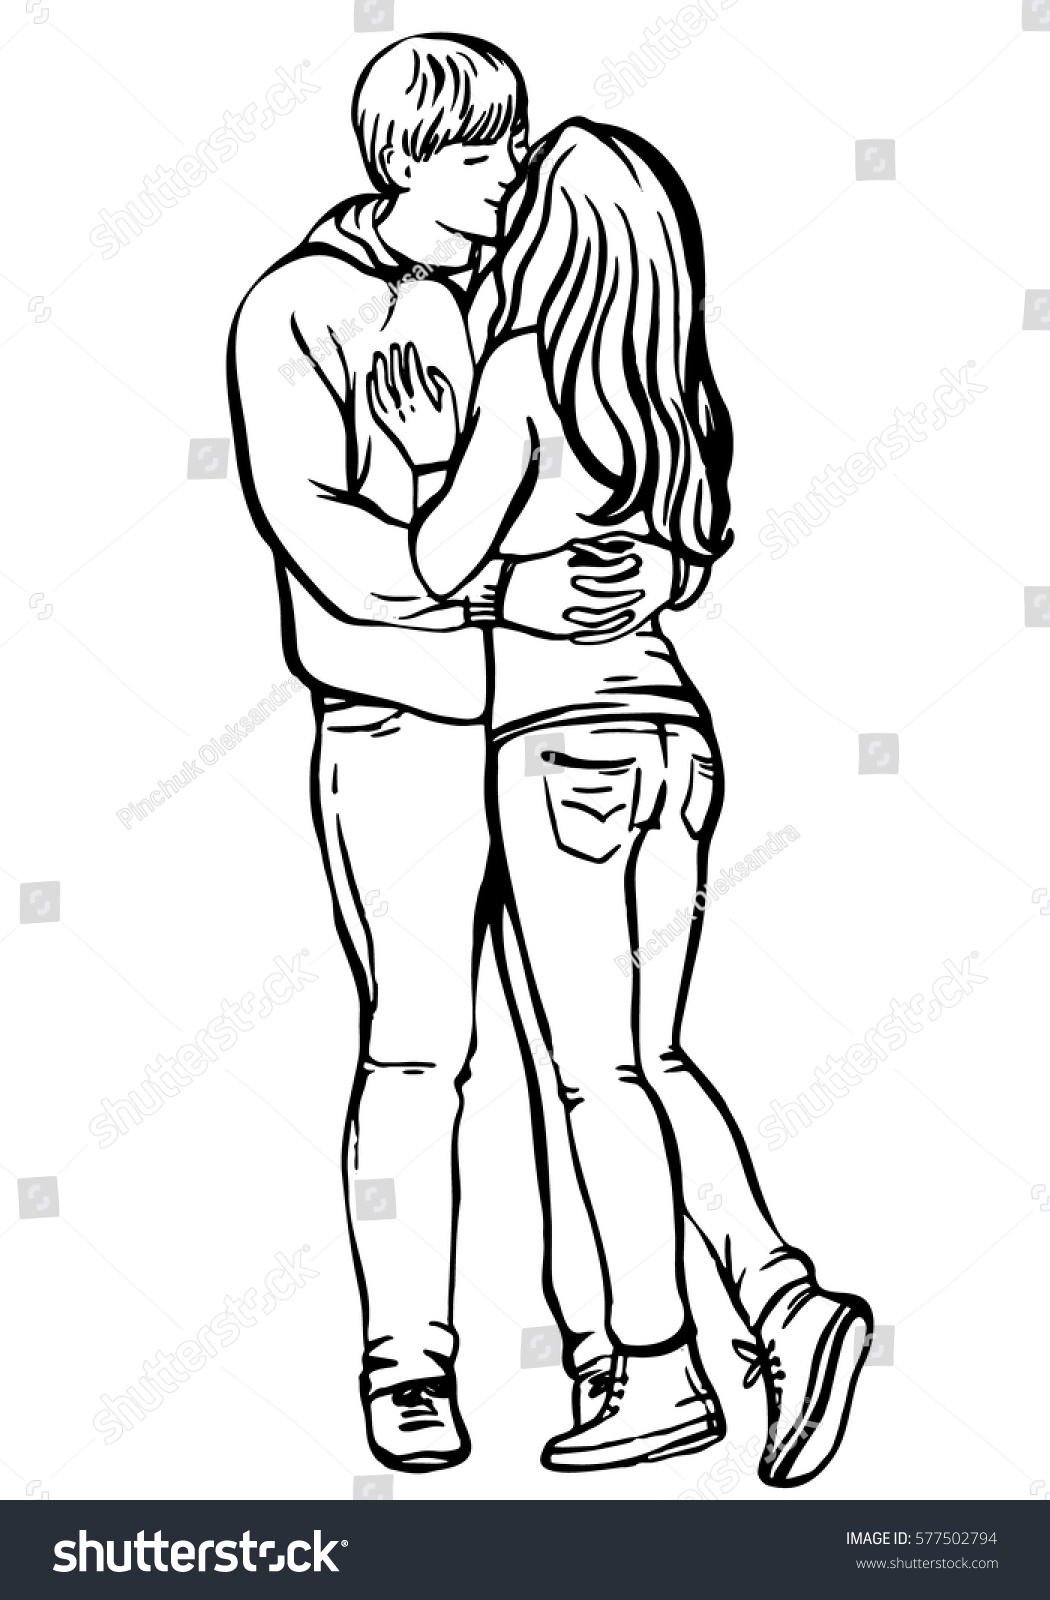 Young couple in love.Sensual sketch portrait of young stylish couple. Embraces of a loving couple, couple hugging and flirting, kissing. Hand drawn illustration.